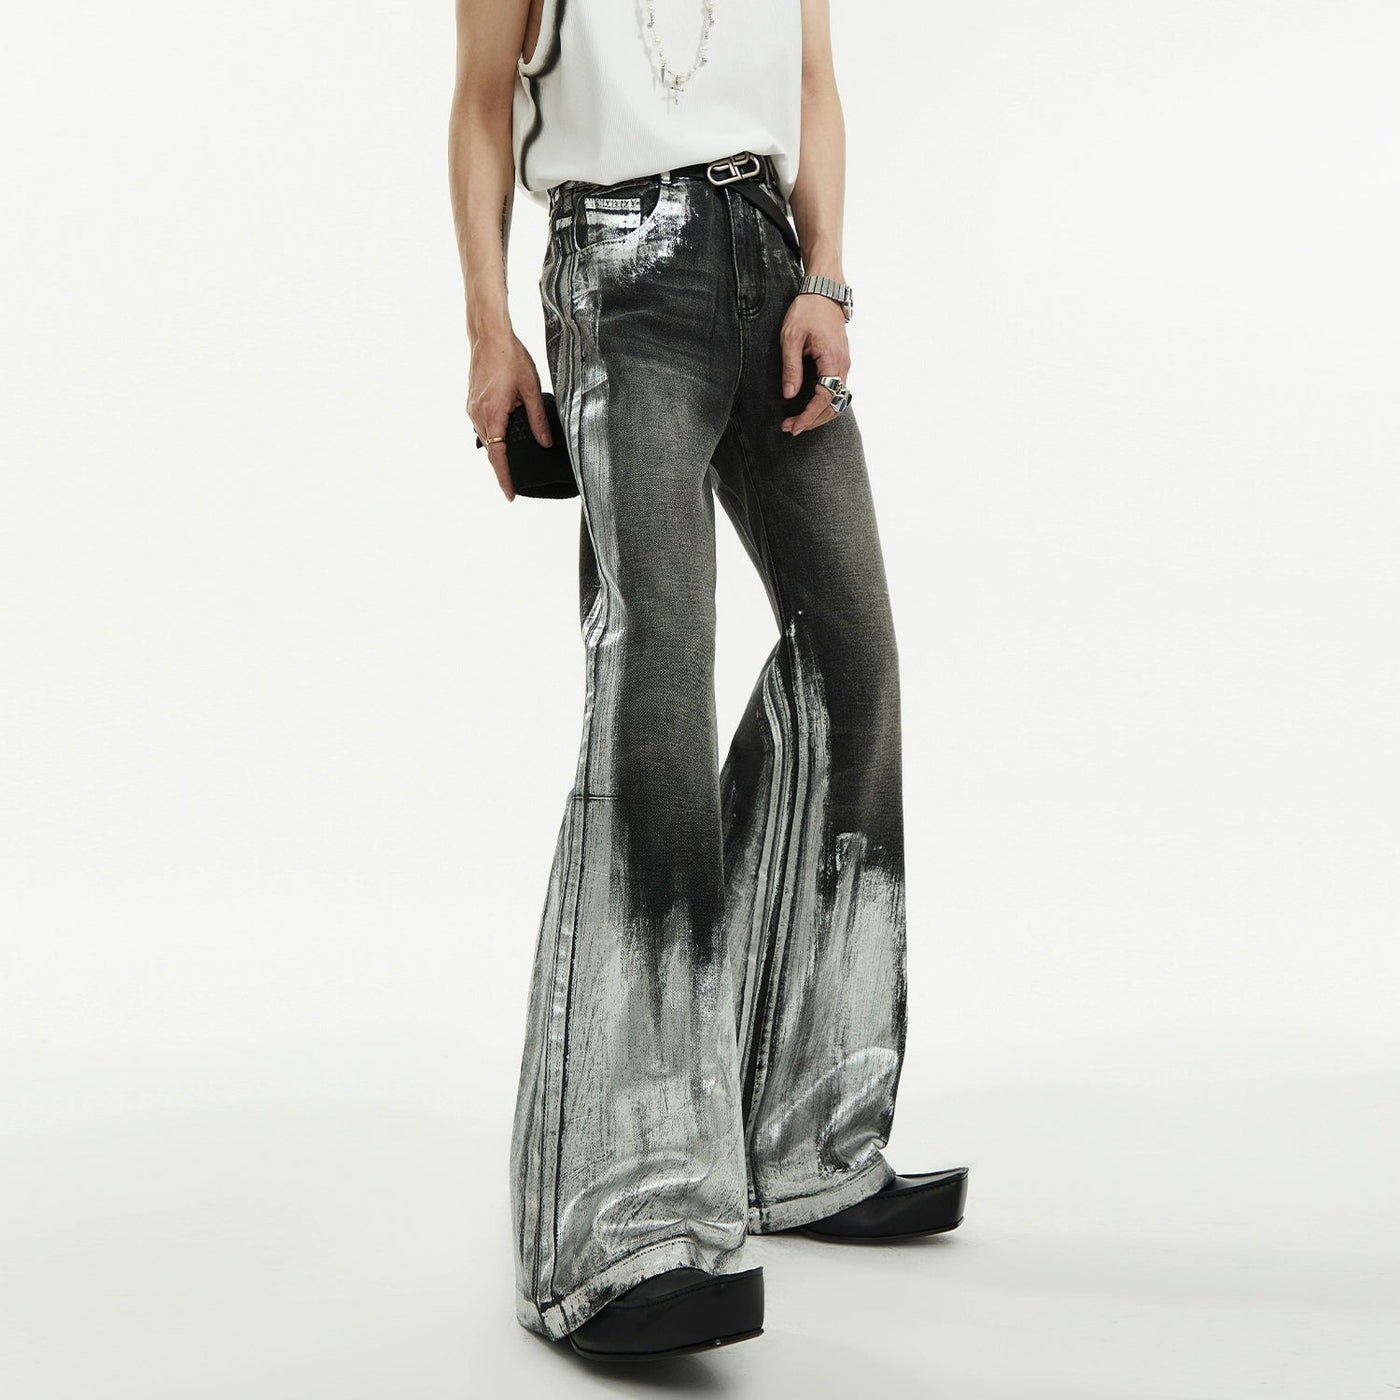 Heavy Two-Toned Jeans Korean Street Fashion Jeans By Slim Black Shop Online at OH Vault